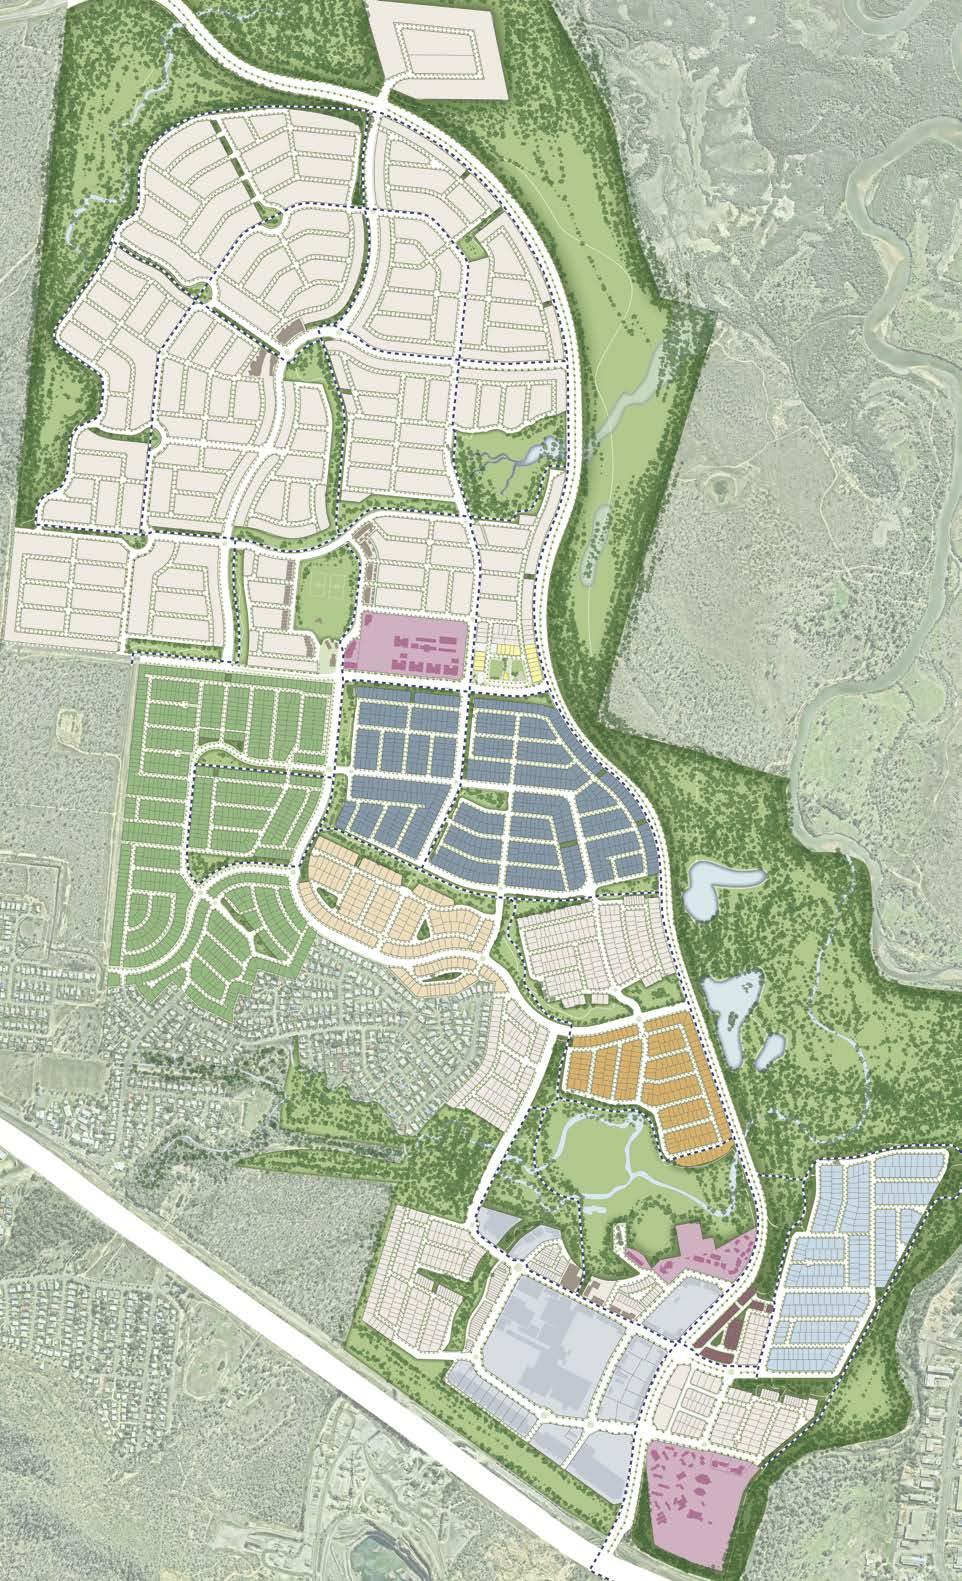 This master plan is provided solely for the purpose of providing Stoney Creek Future Village Centre NORTH SHORE TOWN CENTRE Future home of Health and Wellbeing, Entertainment, Business Enterprise,